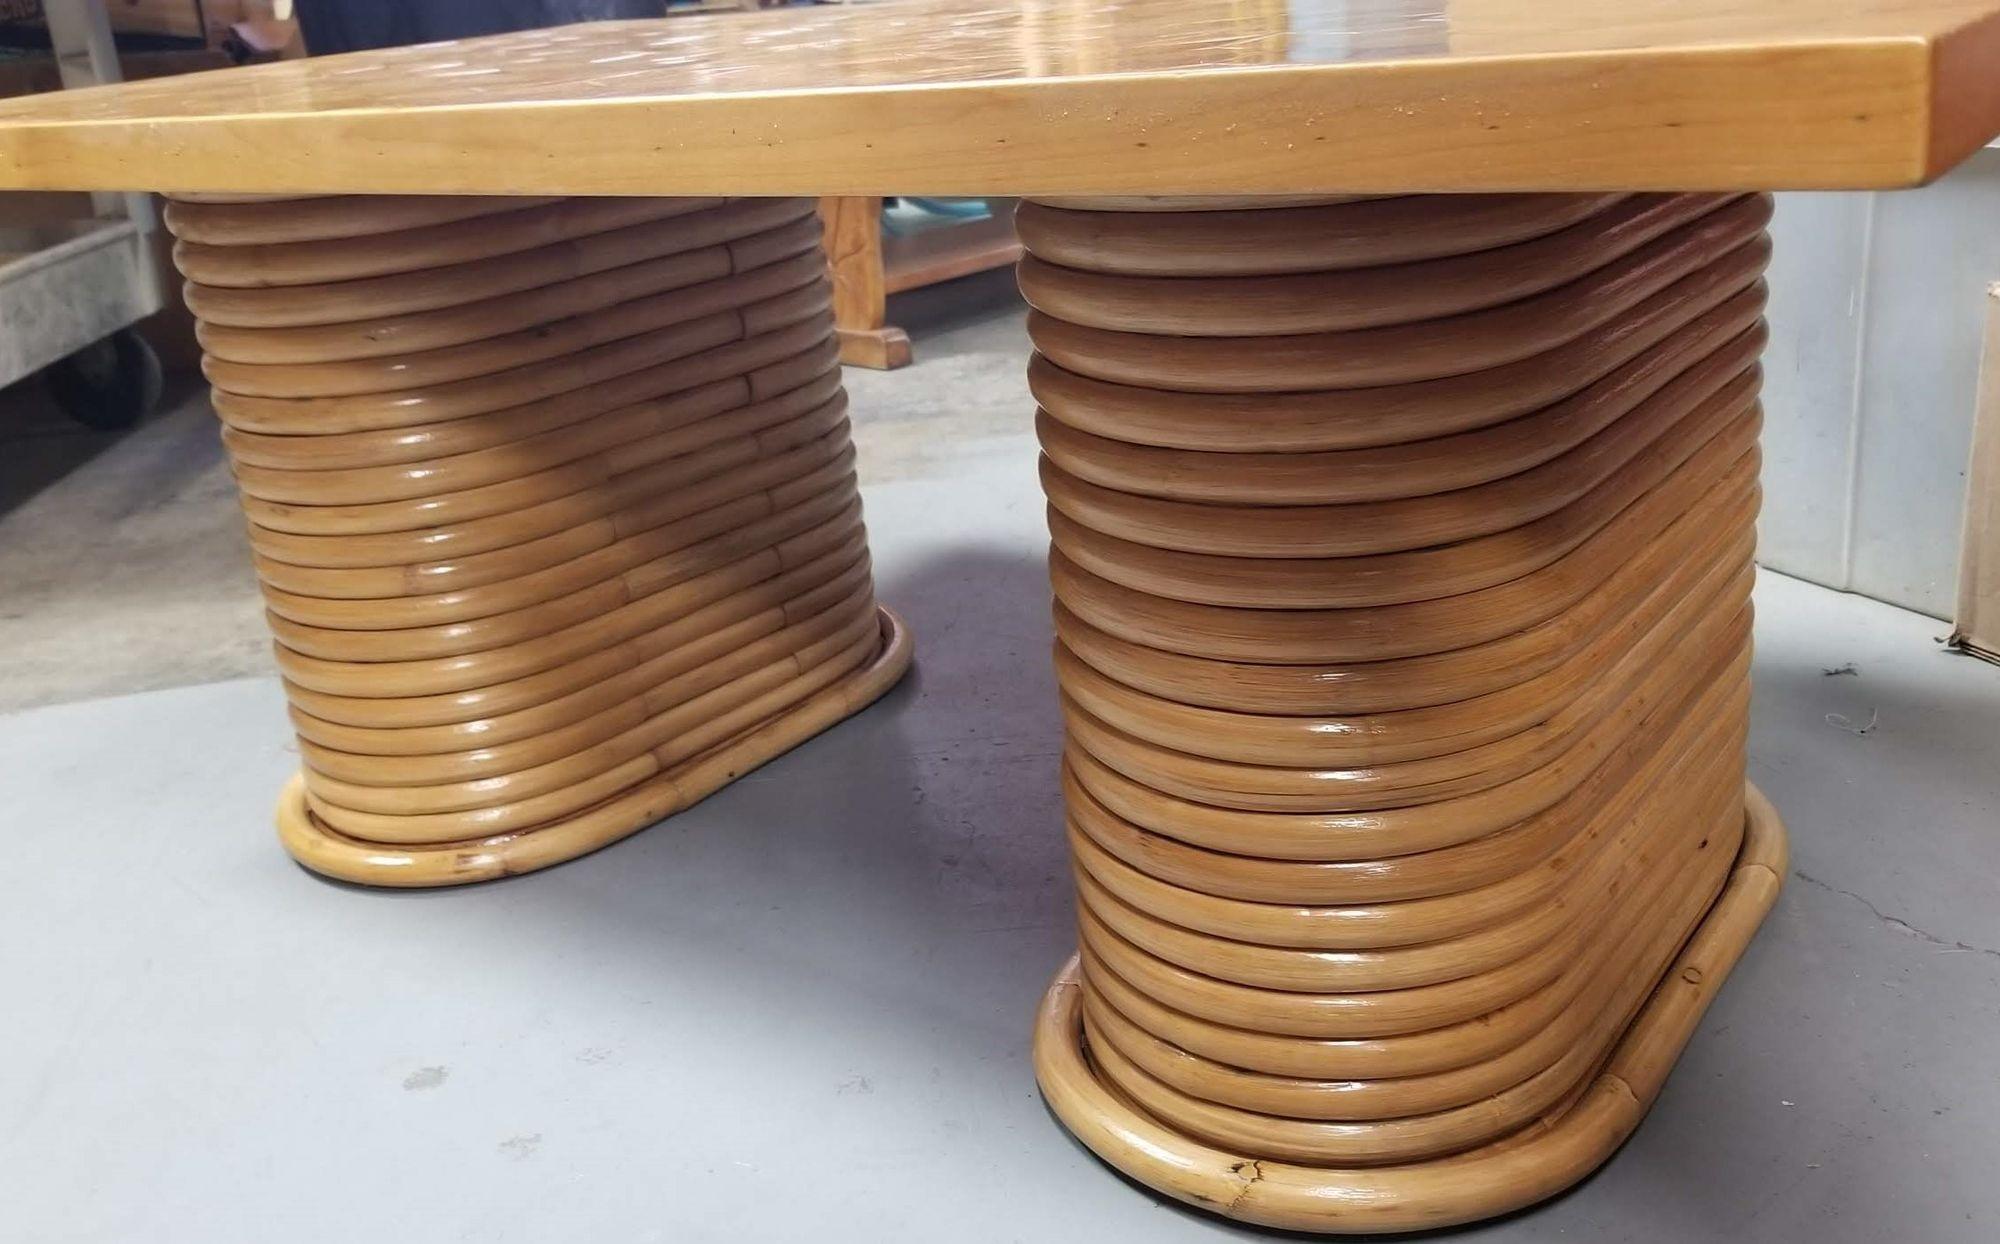 Beautifully restored rattan coffee table featuring a unique cube cut pattern top and stacked pedestal legs.

We only purchase and sell only the best and finest rattan furniture made by the best and most well-known American designers and